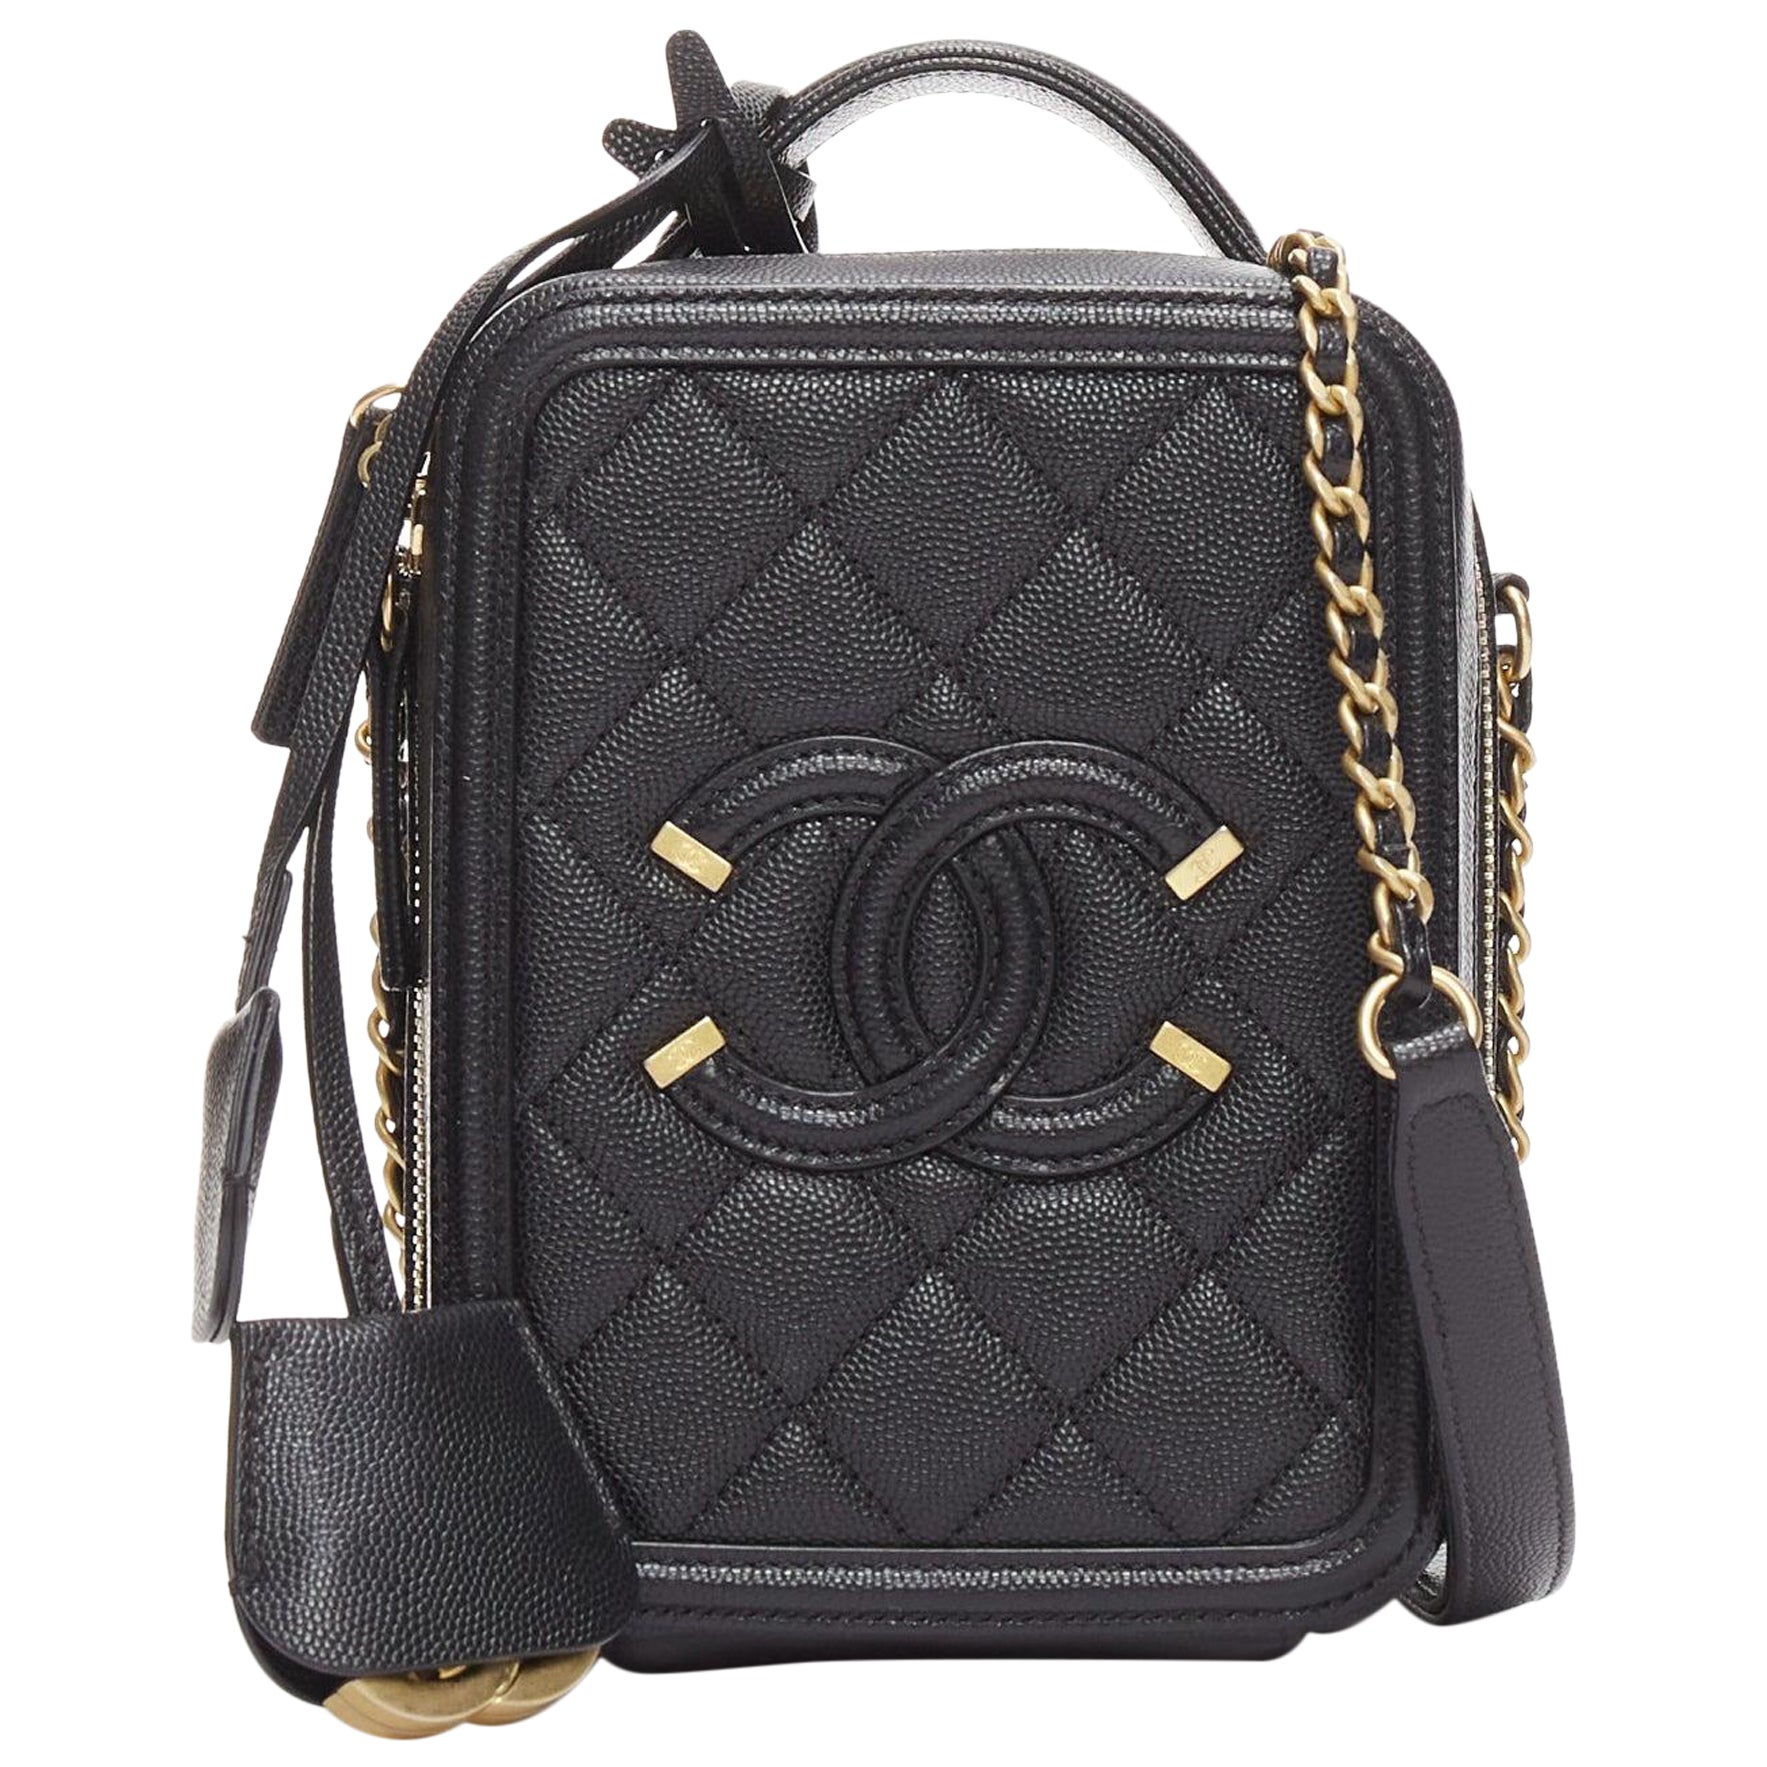 What is a Chanel Filigree bag?